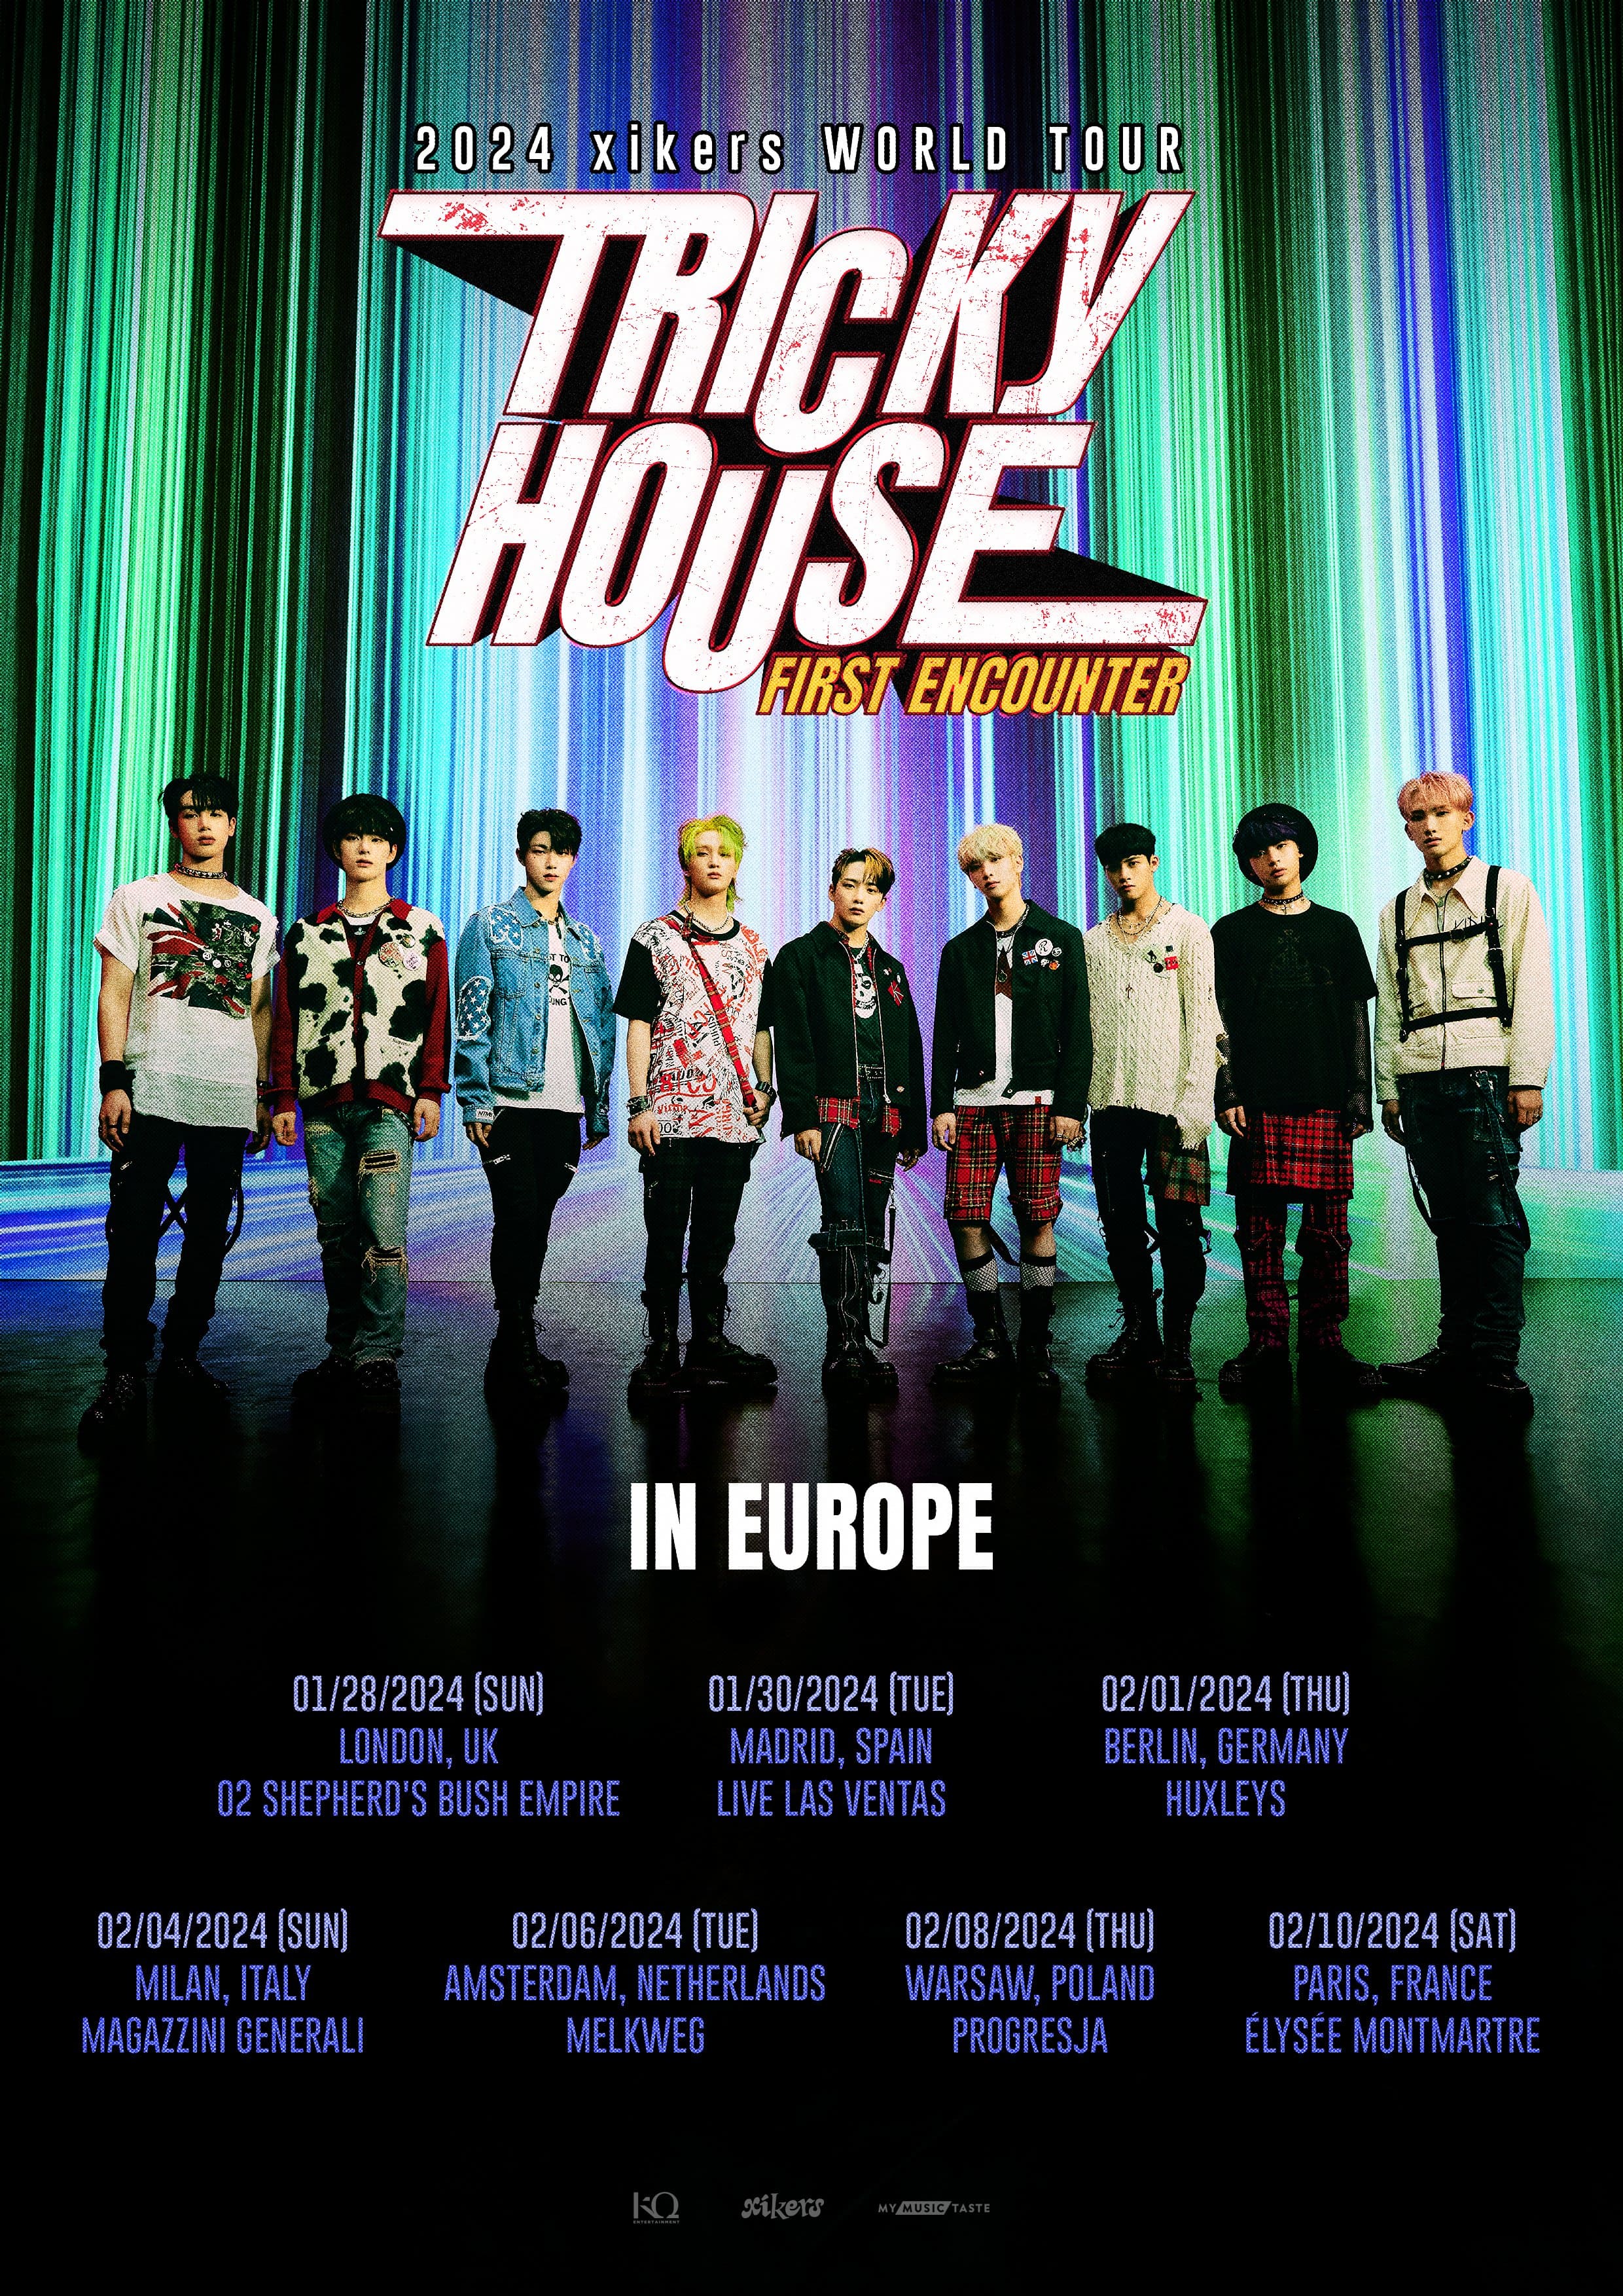 XIKERS - WORLD TOUR ‘TRICKY HOUSE : FIRST ENCOUNTER’ IN EUROPE Poster